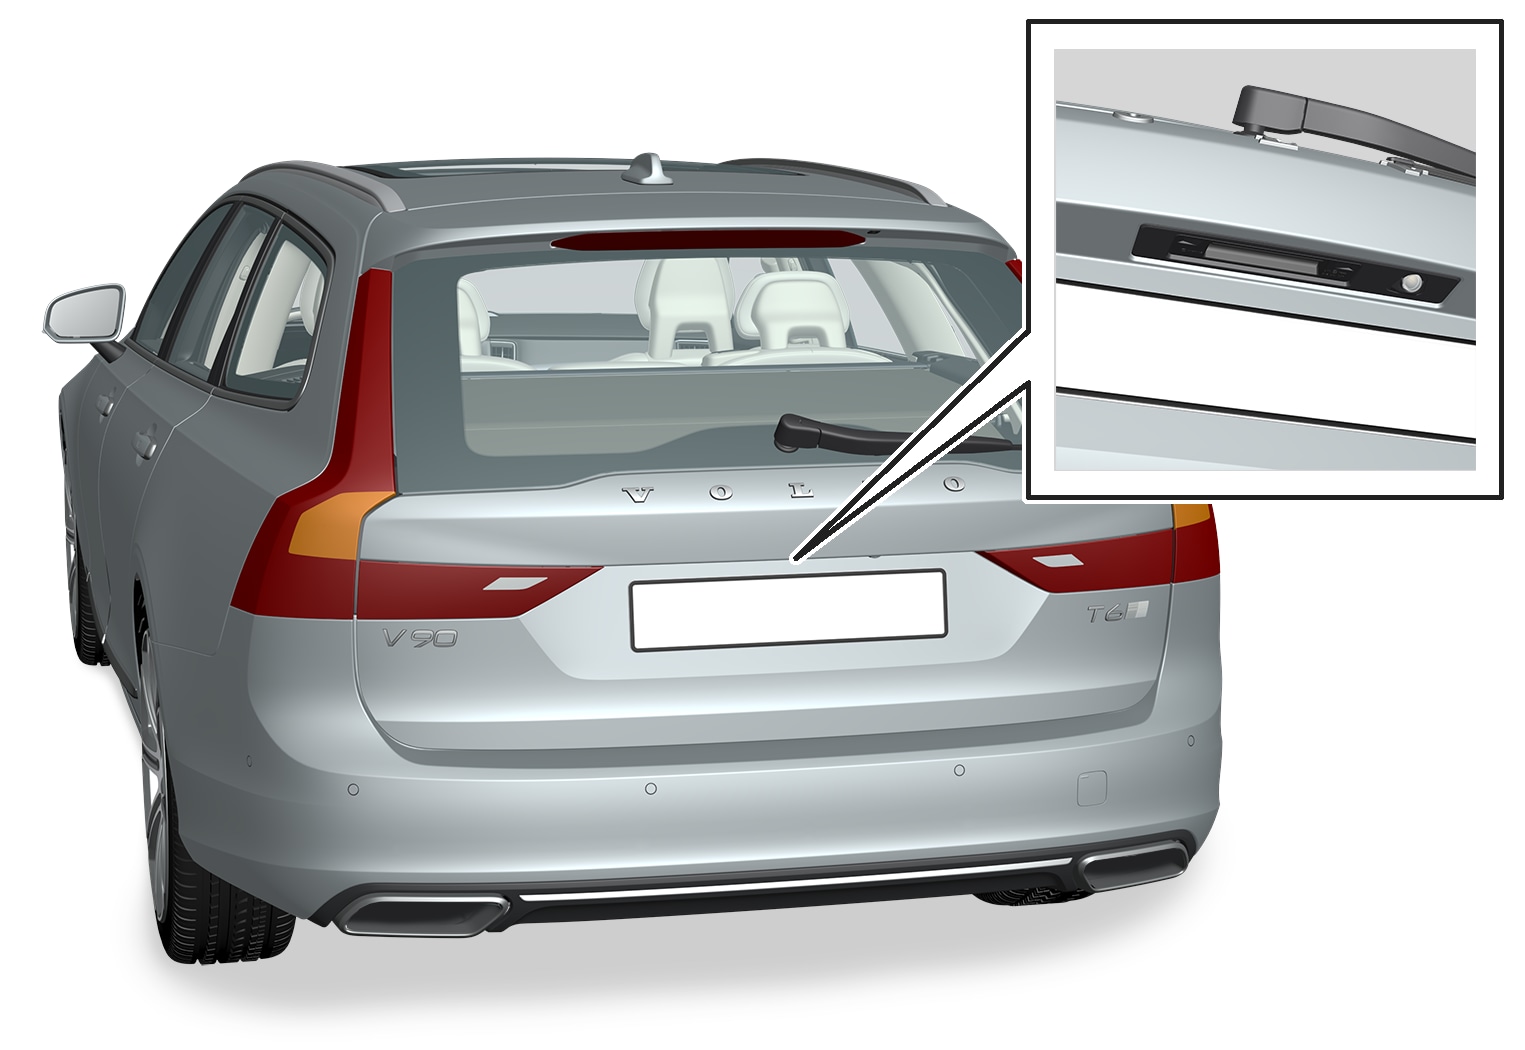 16w17 - SPA - V90 - Tailgate pointing out handle